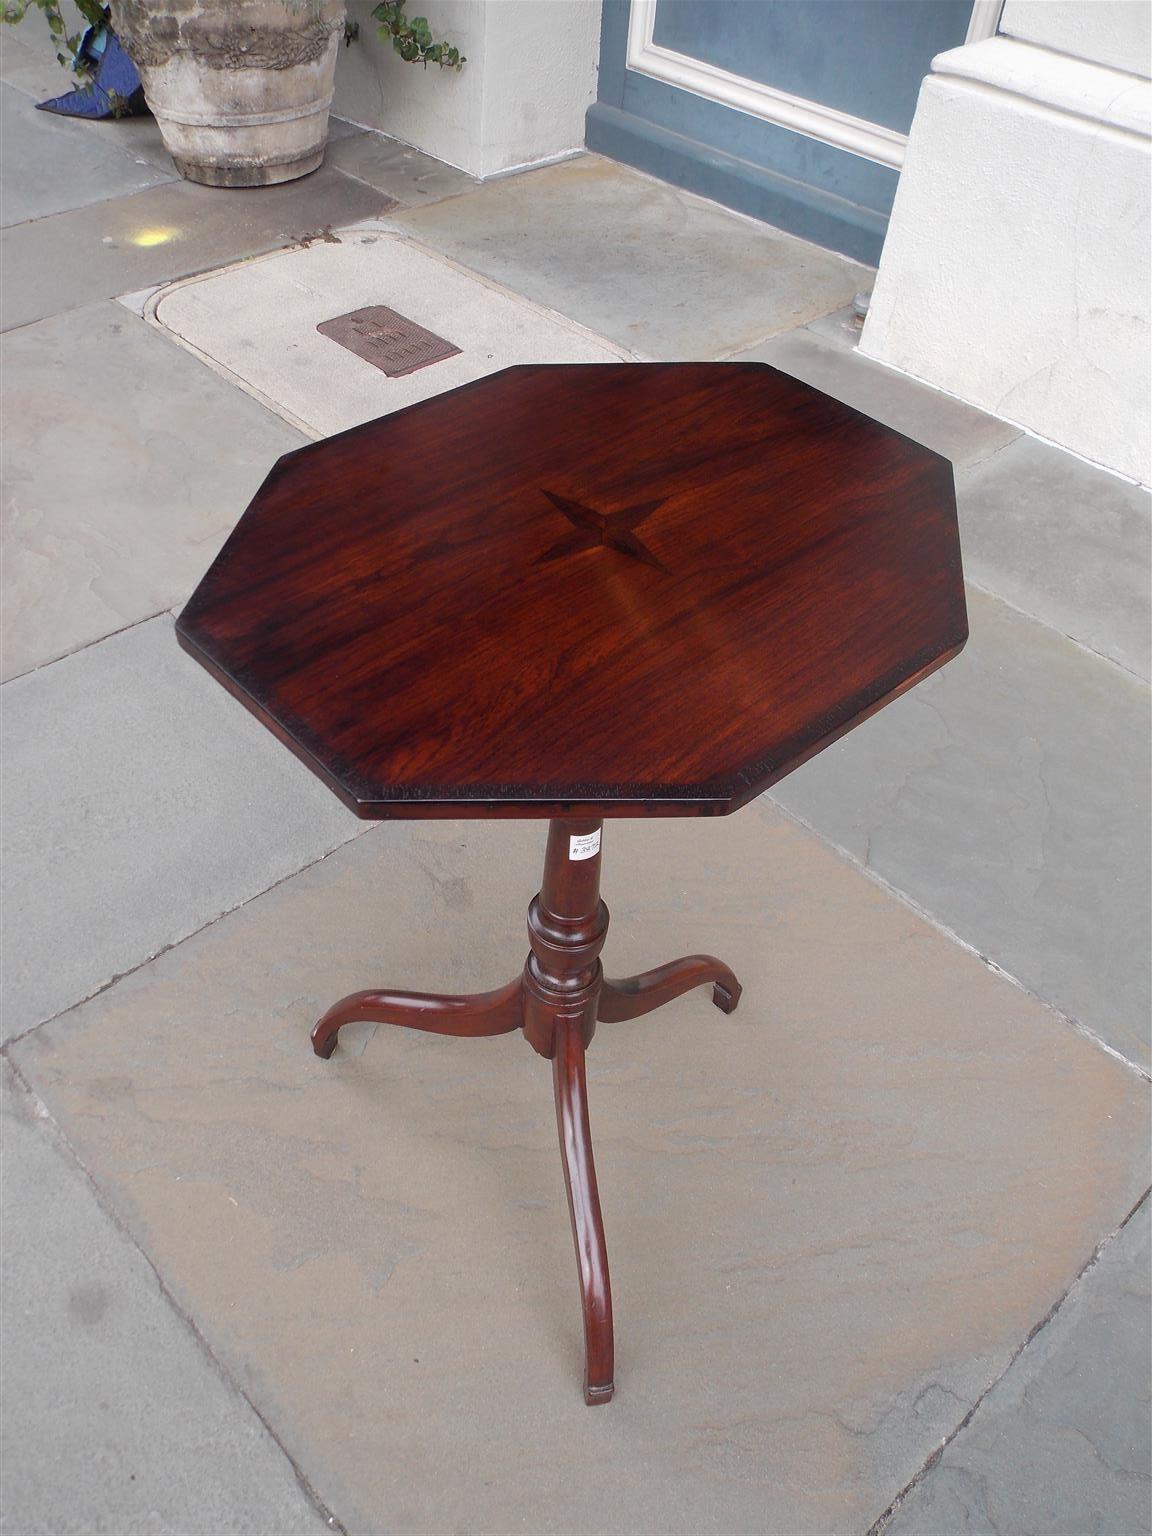 Late 18th Century  American Hepplewhite Mahogany Star Inlaid Candle Stand on Saber Legs, C. 1790 For Sale